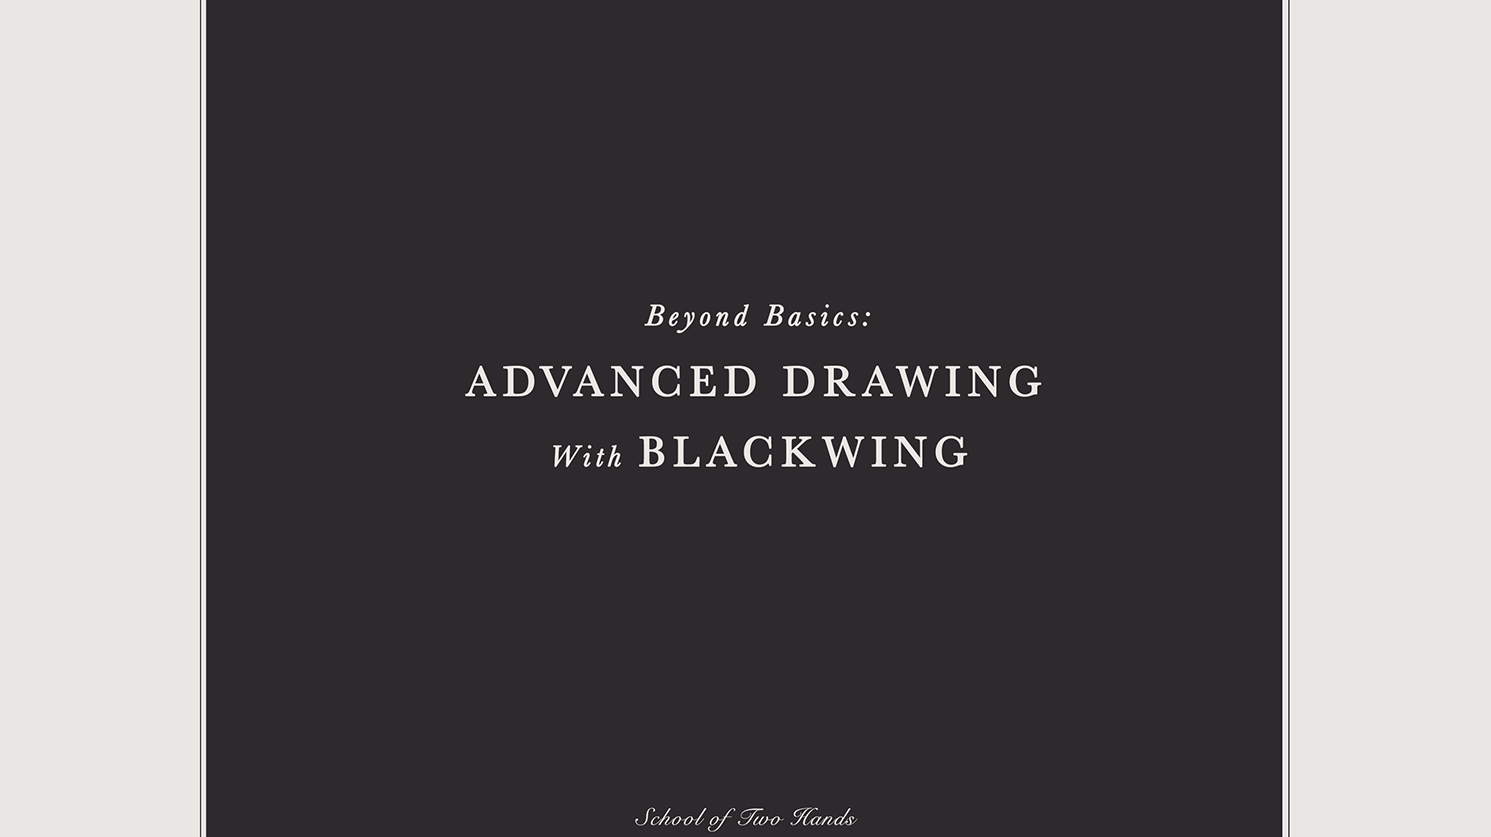 Beyond Basics: Advanced Drawing with Blackwing